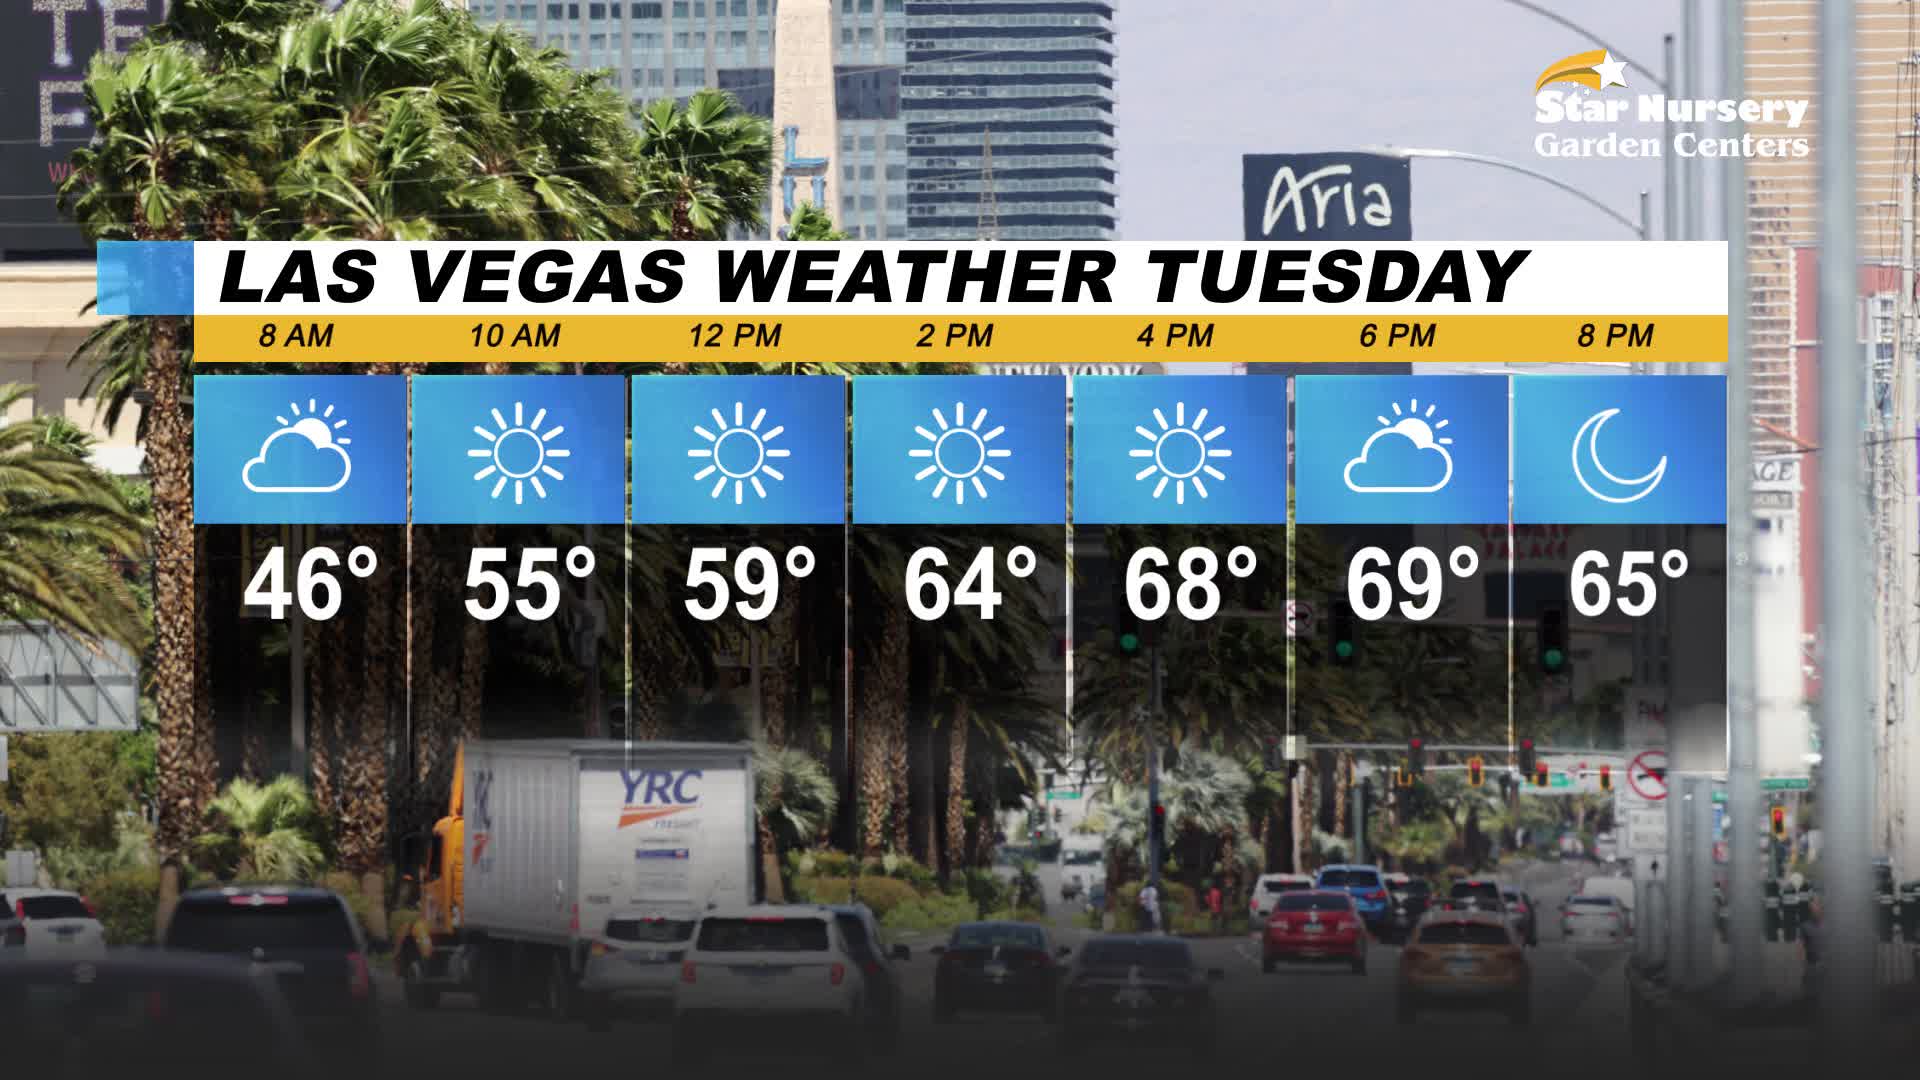 Sunny to partly cloudy skies for Tuesday